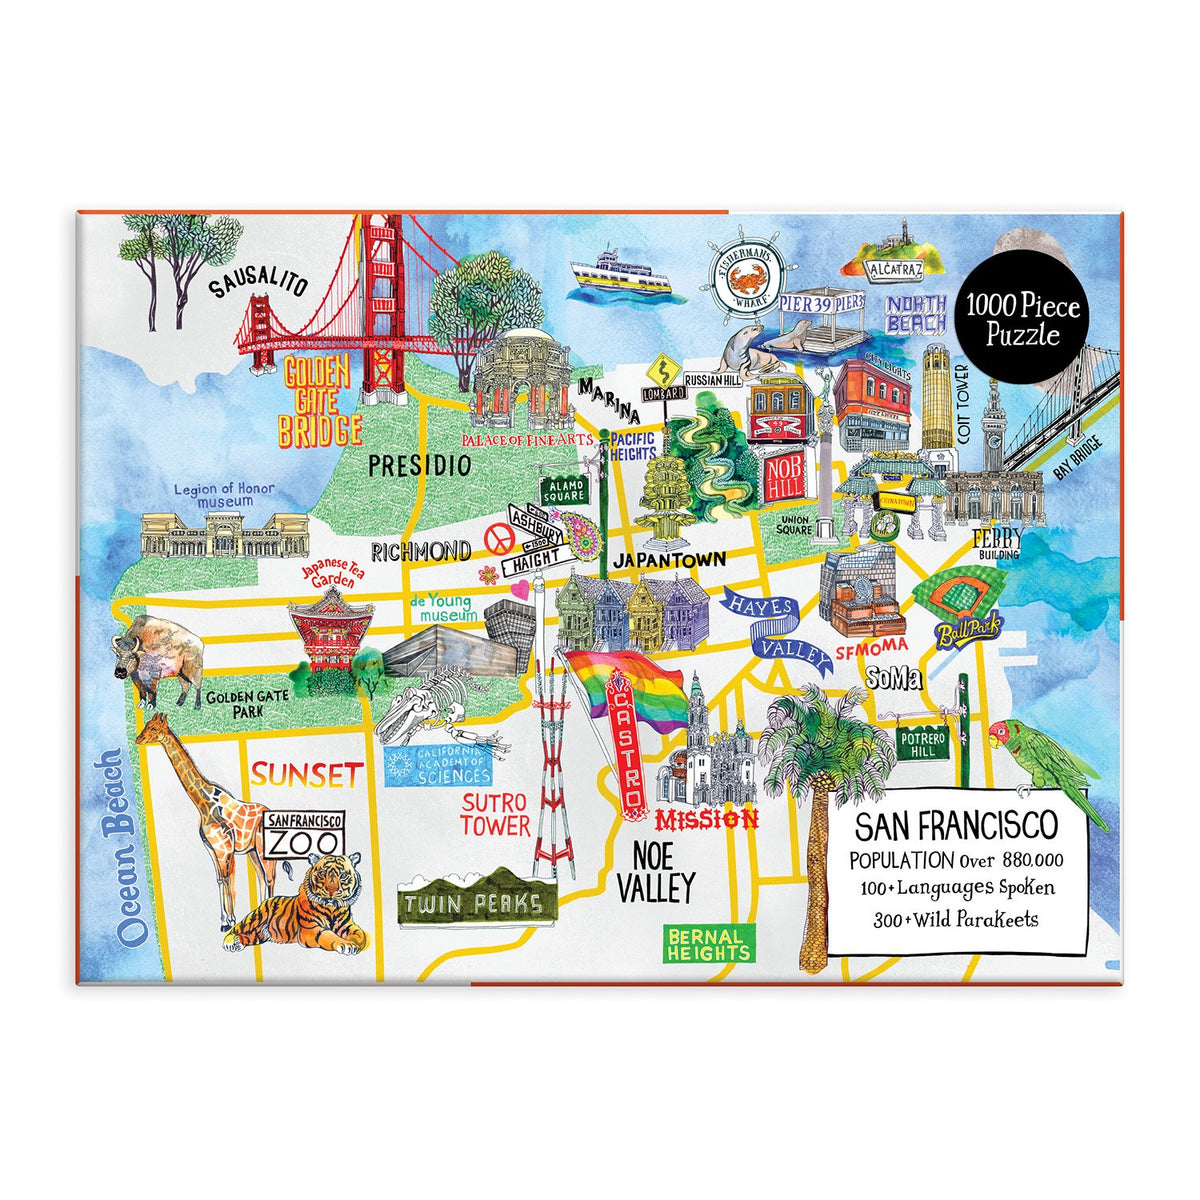 San Francisco 1000 Piece Jigsaw Puzzle 1000 Piece Puzzles Cities Collection 